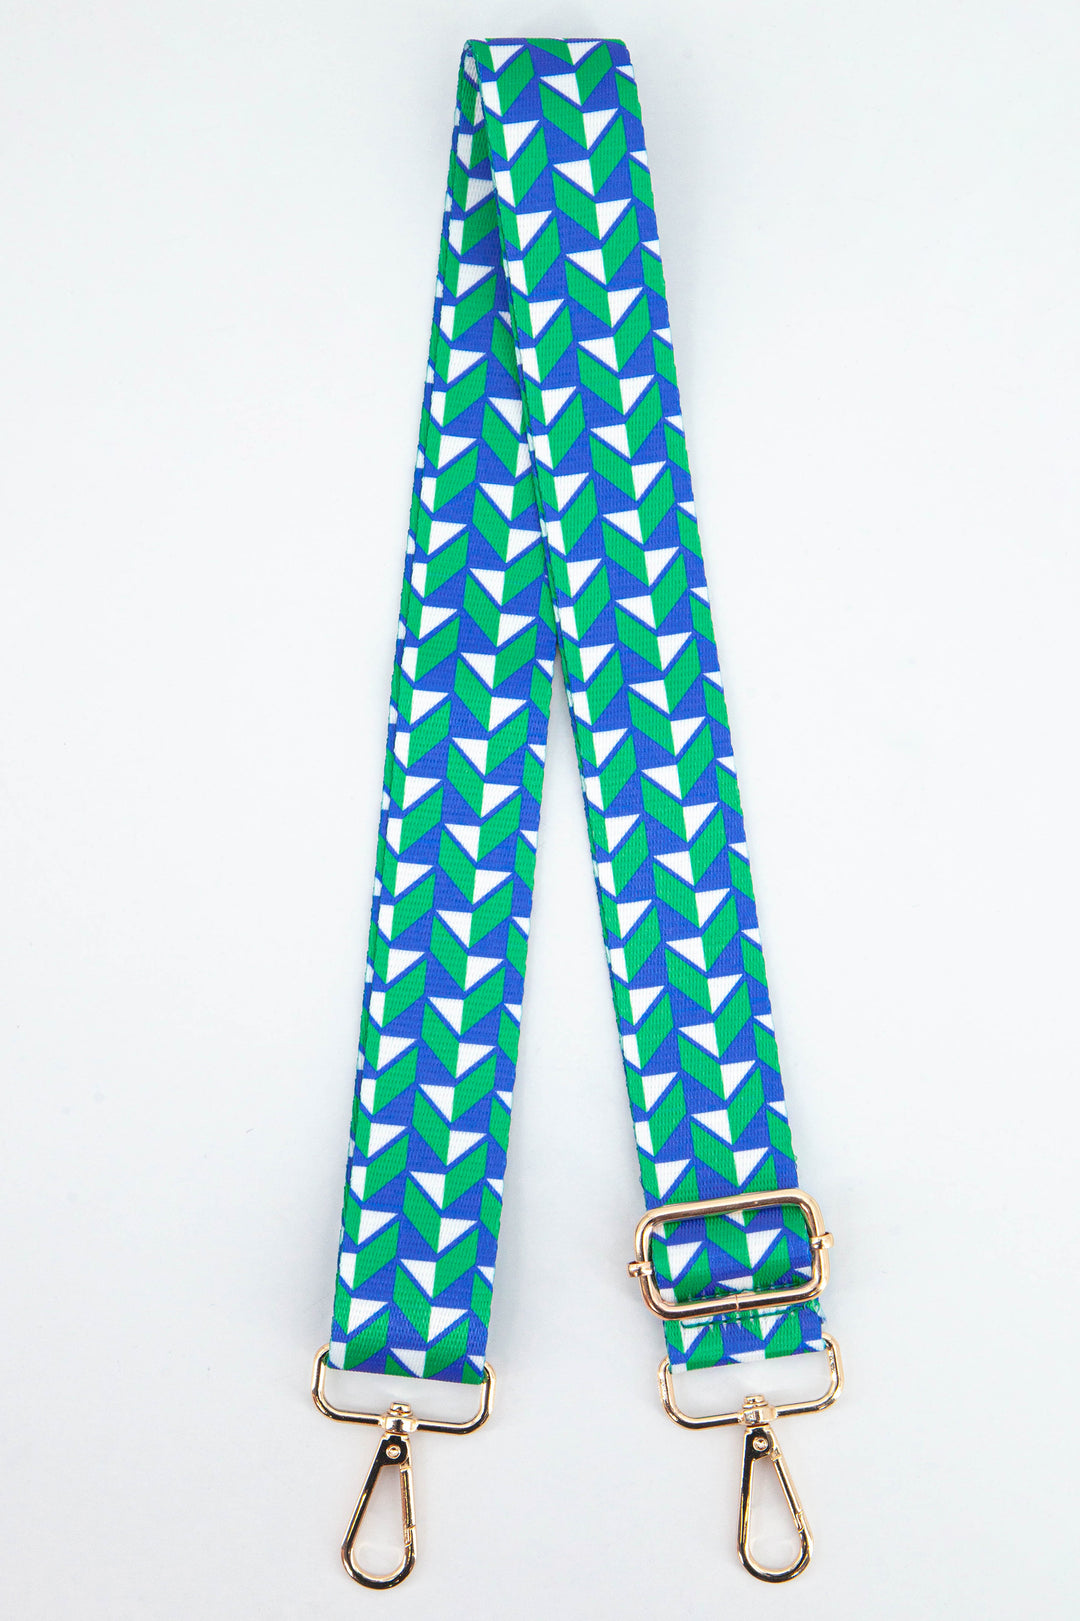 blue and green three dimensional chevron pattern bag strap with gold snap hook attachments